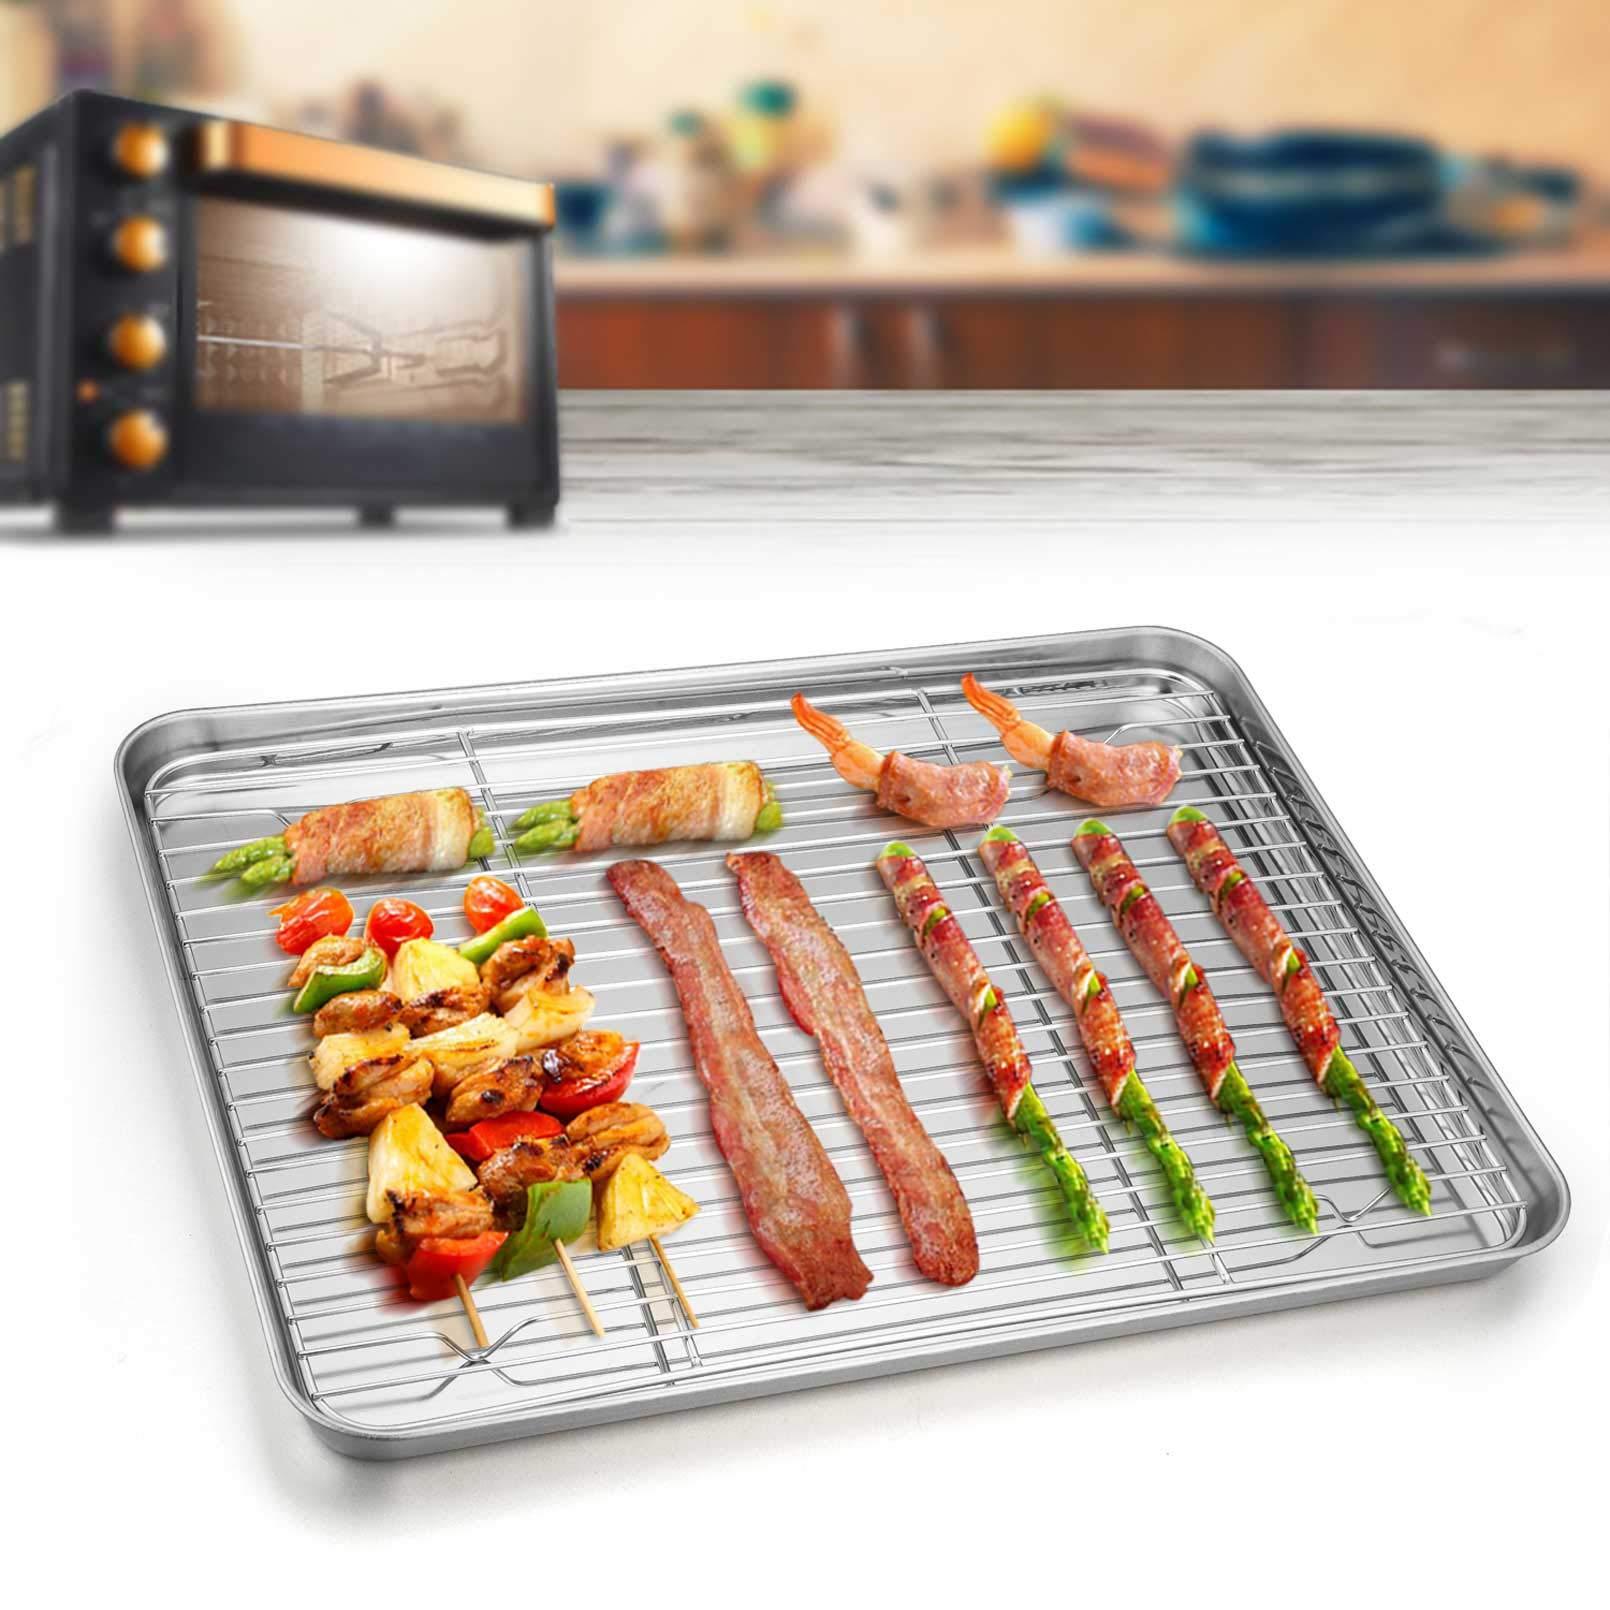 TeamFar Baking Sheet with Rack Set, Stainless Steel Cookie Sheet Baking Pans with Cooling Rack, Non Toxic & Healthy, Rust Free & Heavy Duty, Mirror Finish & Easy Clean, Dishwasher Safe - 6 Pieces - CookCave